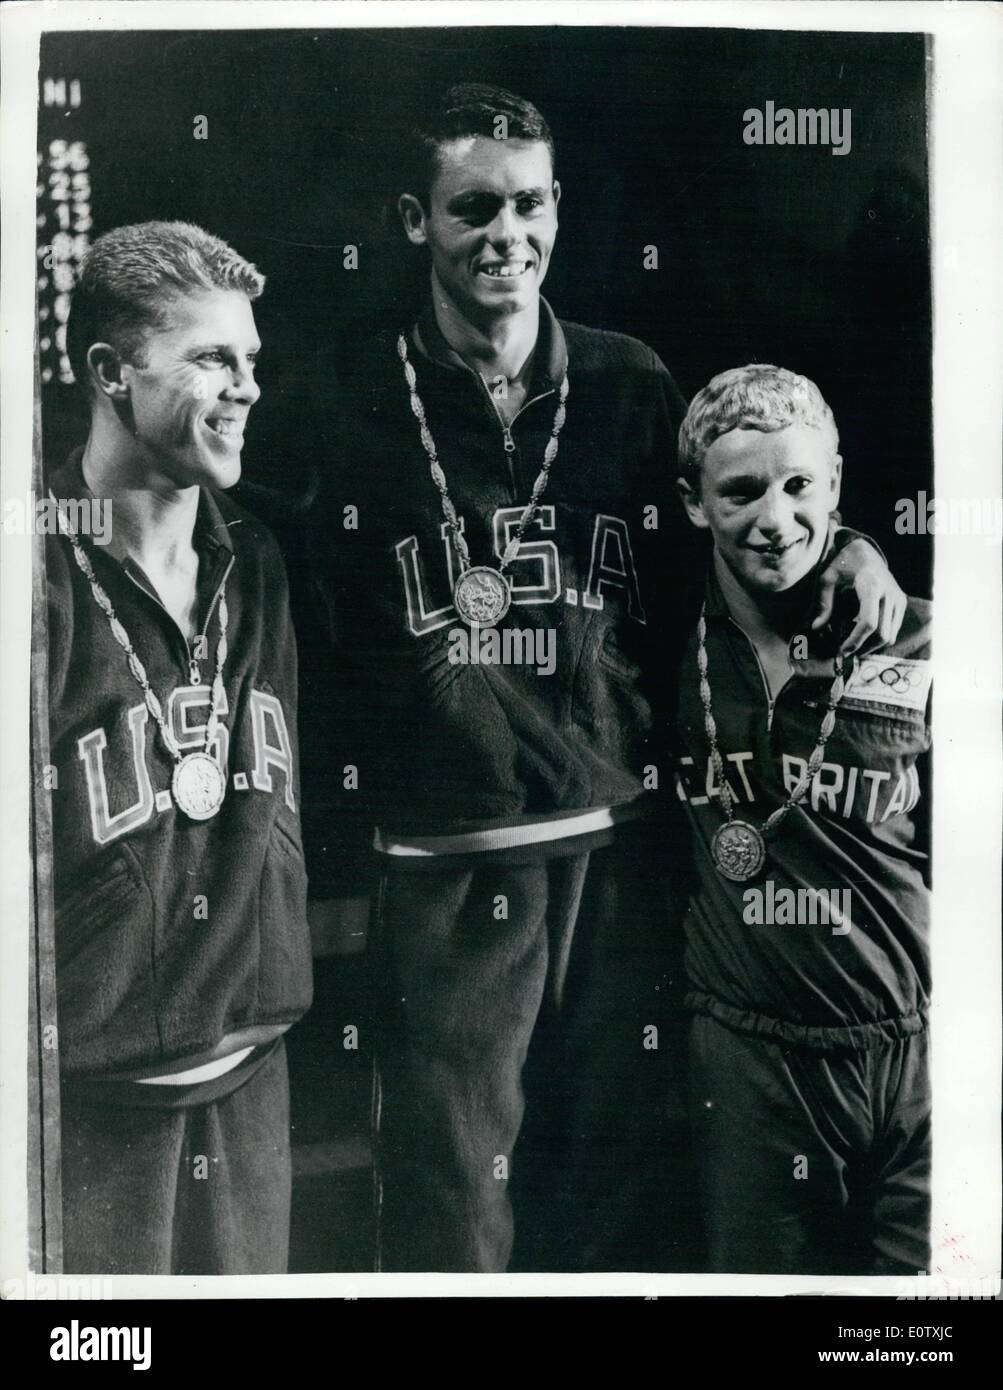 Sep. 04, 1960 - 4-9-60 Olympic Games in Rome. Winners of Men's 10M Diving Event. Bronze for Phelps. Brian Phelps, the 16-year old British diver, won a Bronze Medal when he finished third in the Men's 10 Meters Diving Event. R. Webster of the U.S.A. and G. Tobian, also of the U.S.A. finished first and second respectively. Keystone Photo Shows: Pictured after receiving their medals are Robert Webster (Centre), the winner, G. Tobian (left), second, and Brian Phelps (right), third. Stock Photo